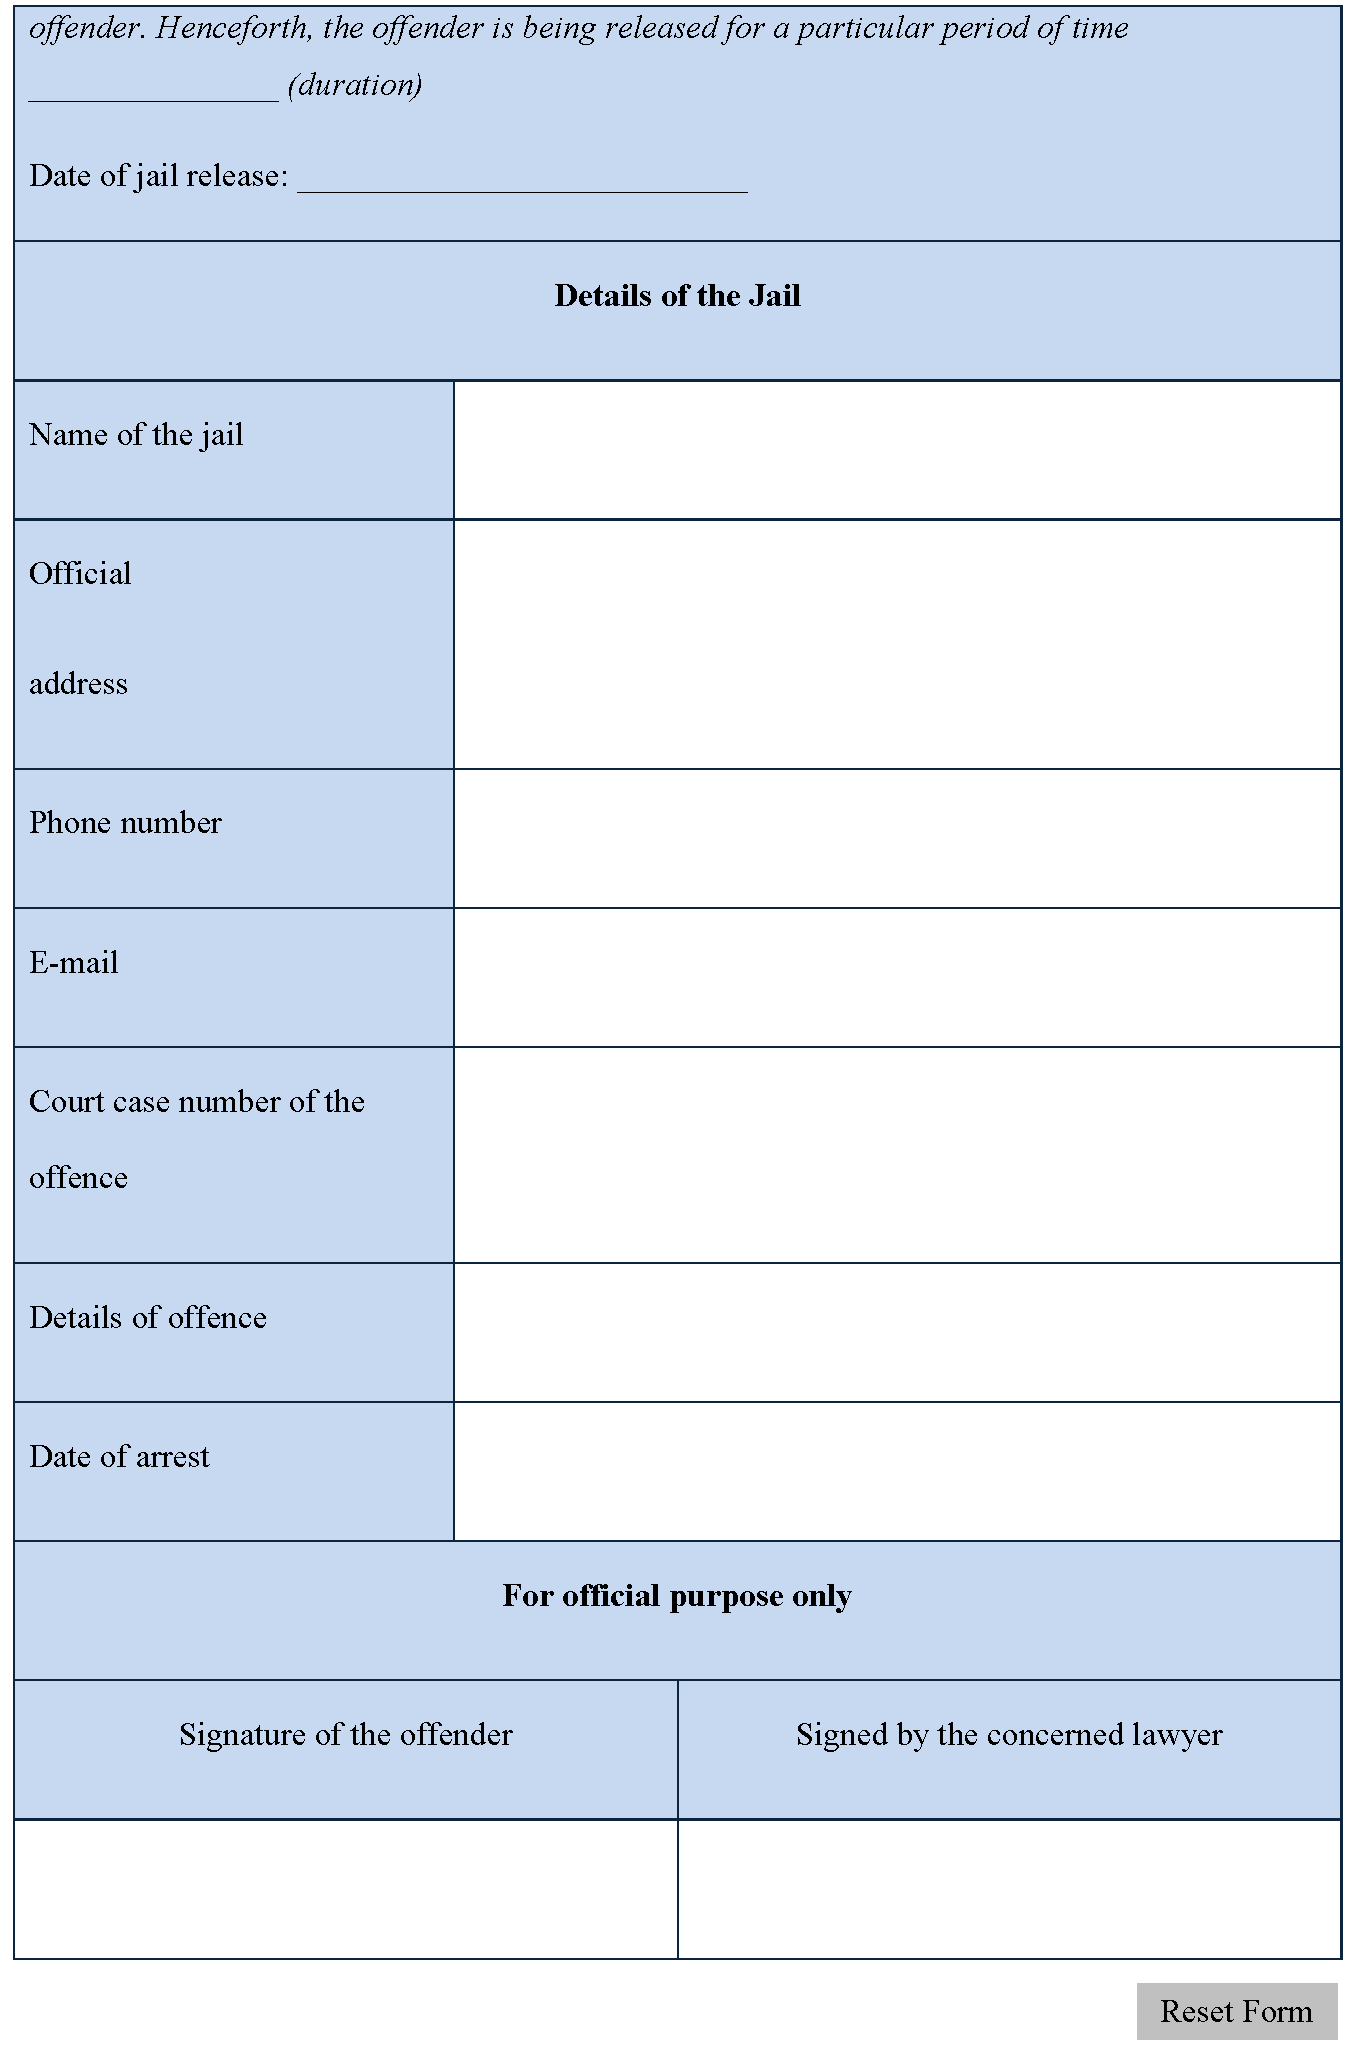 jail-release-form-editable-forms